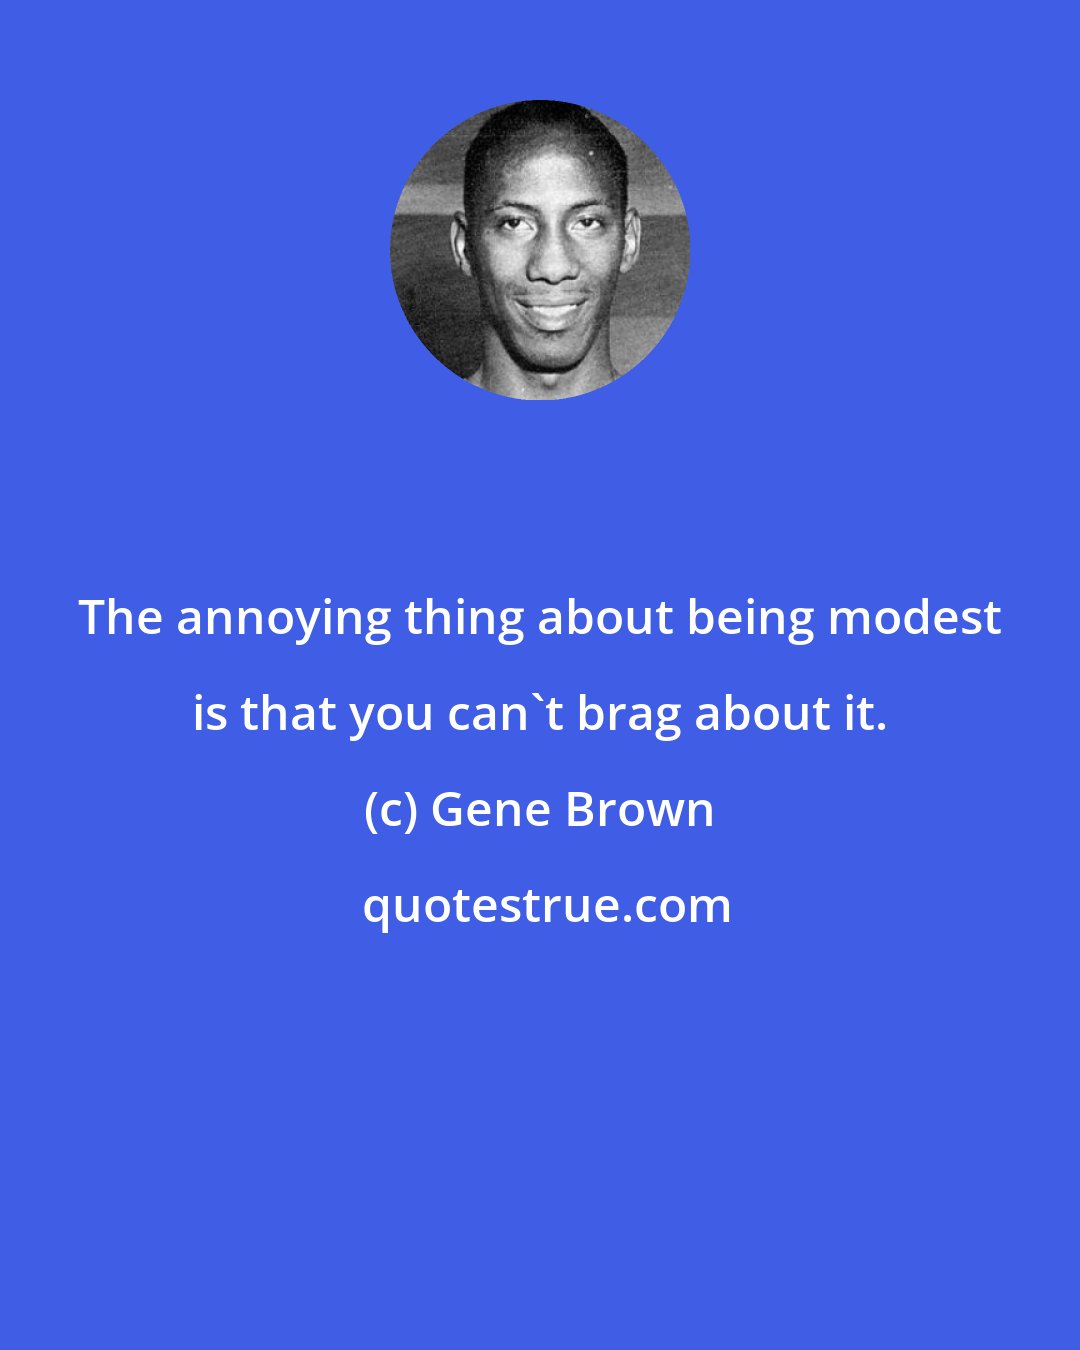 Gene Brown: The annoying thing about being modest is that you can't brag about it.